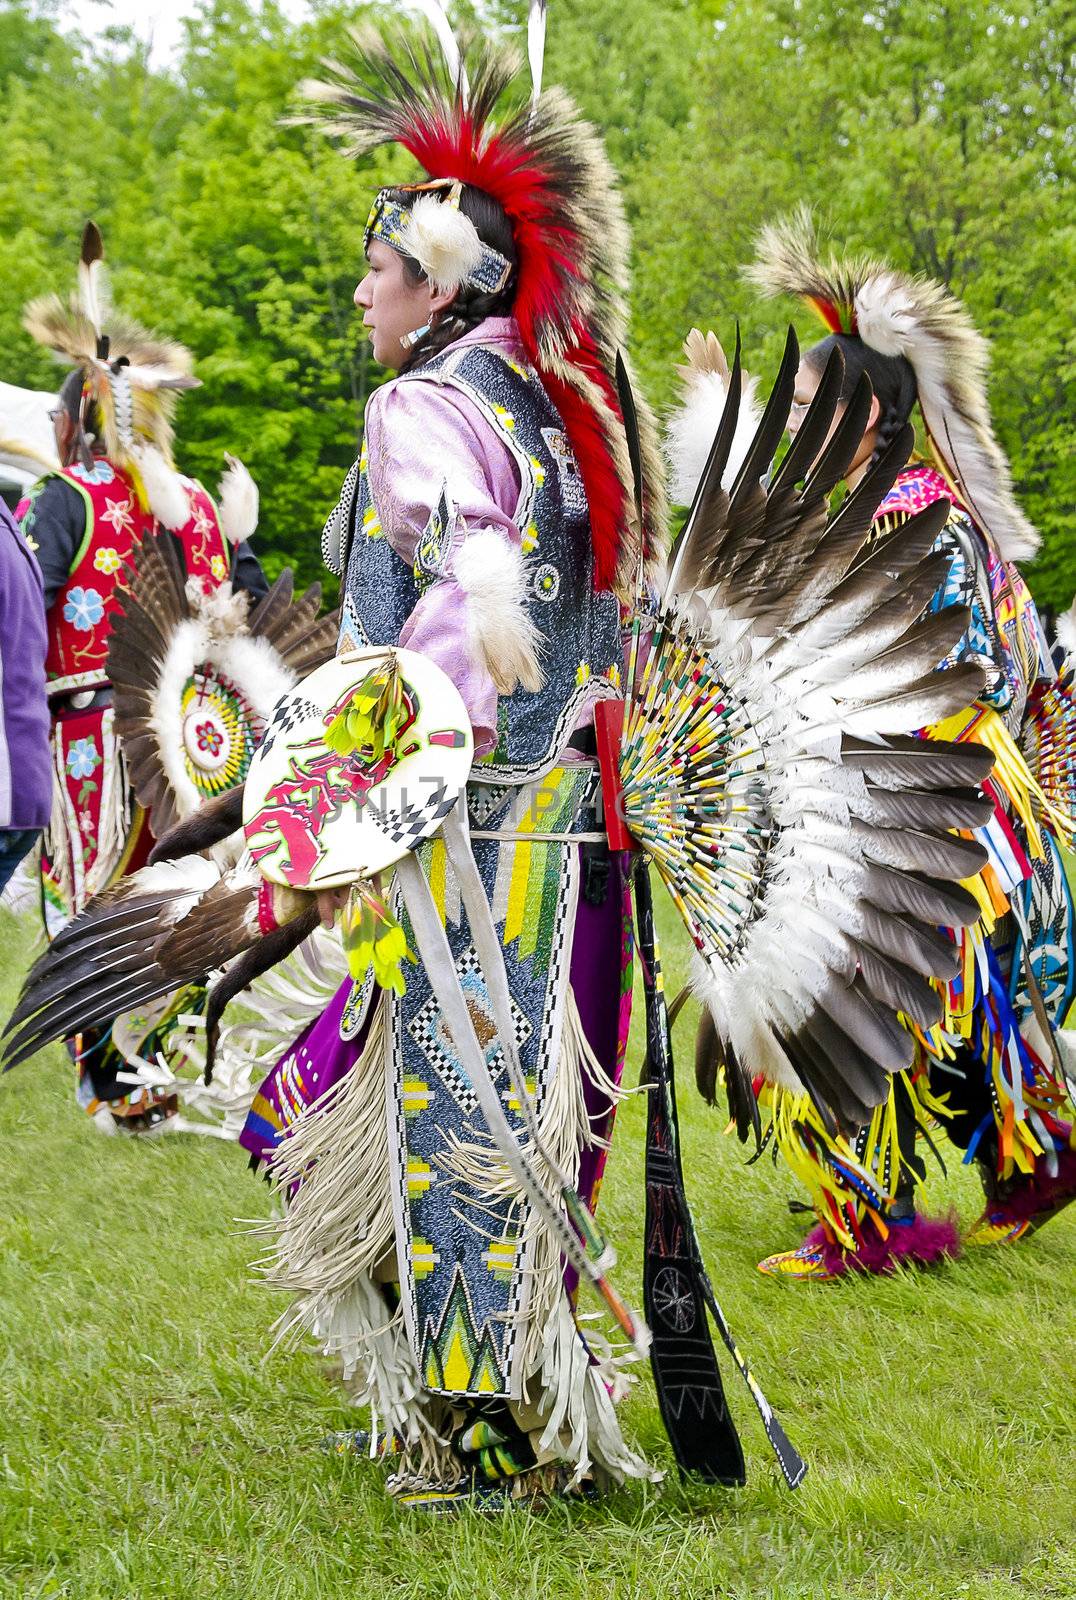 OTTAWA, CANADA - MAY 28: Unidentified aboriginal men and women dancers in full dress and head regalia during the Powwow festival at Ottawa Municipal Campground in Ottawa Canada on May 28, 2011.
Photo: Michel Loiselle / yaymicro.com.